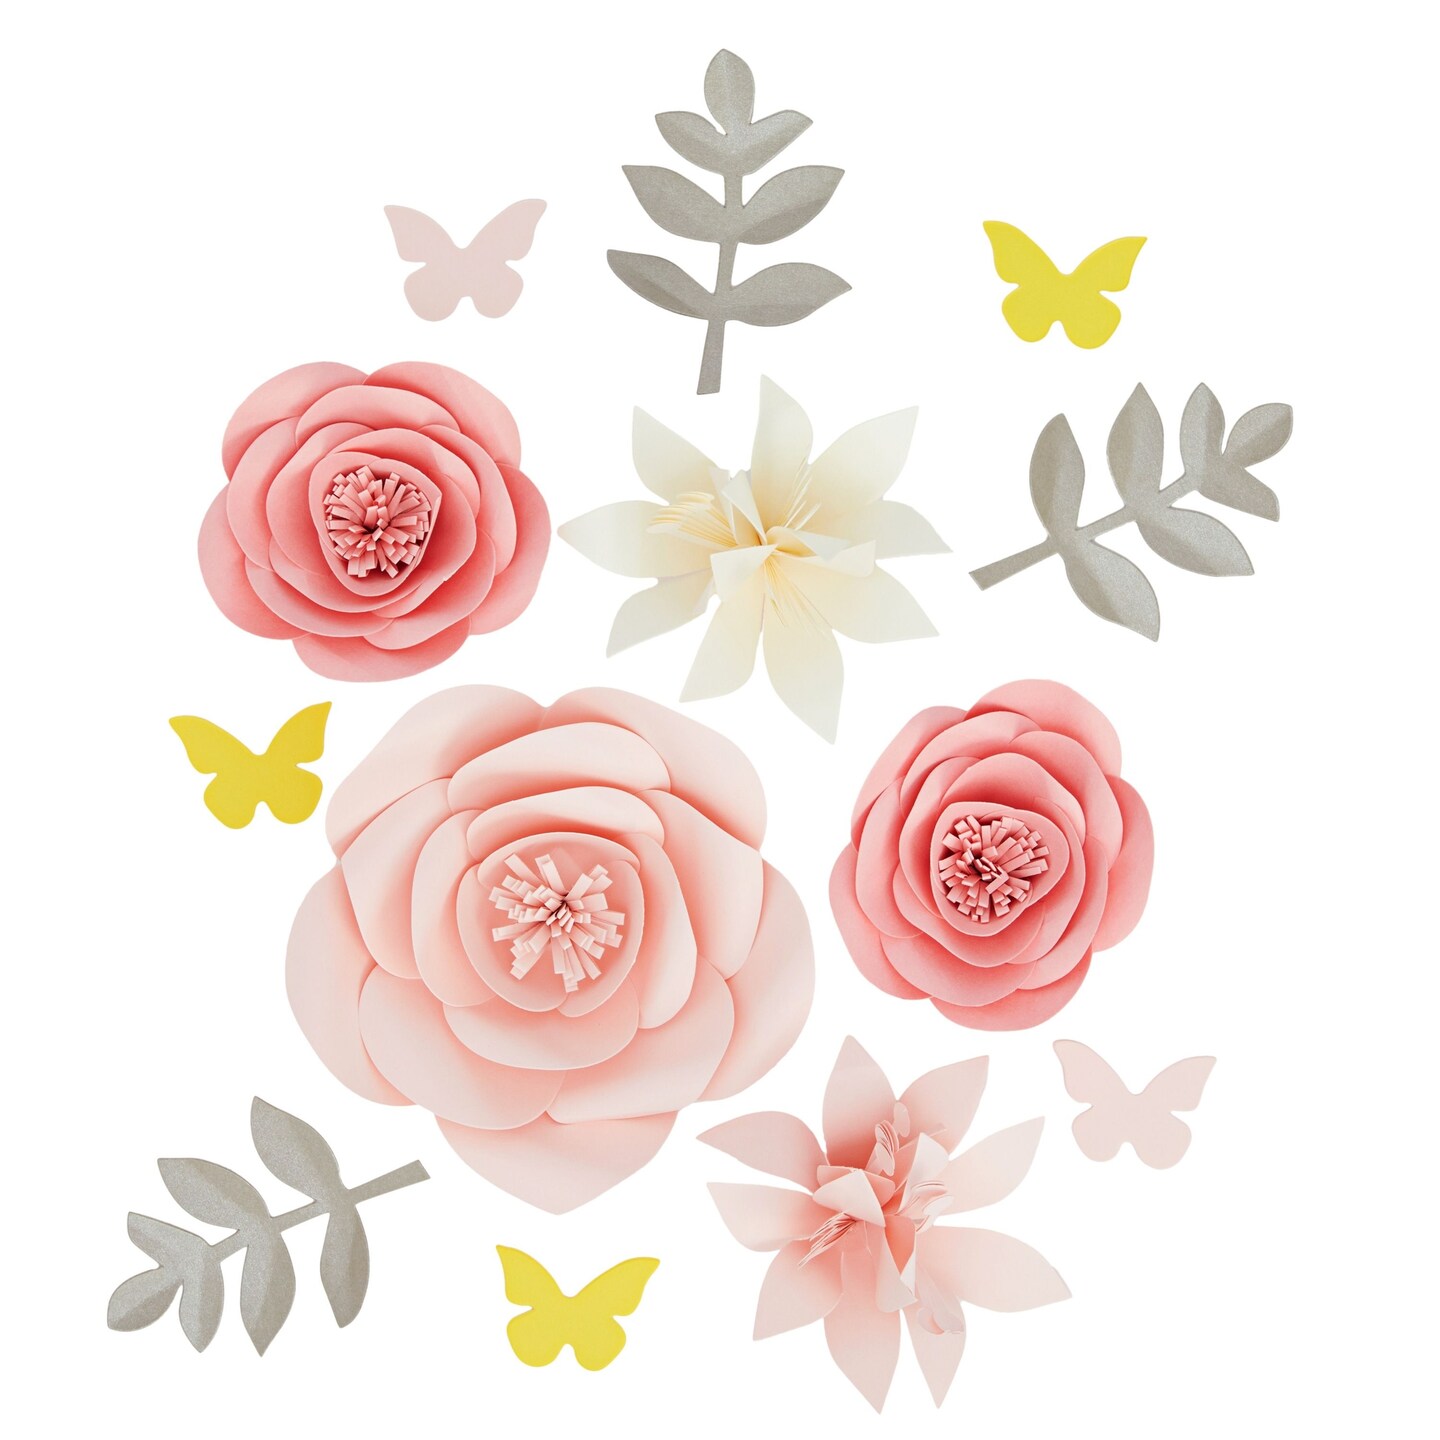 Farmlyn Creek 13 Pieces 3D Paper Flowers Decorations For Wall Decor, Pink Floral Ornamentation with Lilies, Butterflies, Quick and Easy-Install Elegant Flower Wall Decor for Home Improvement